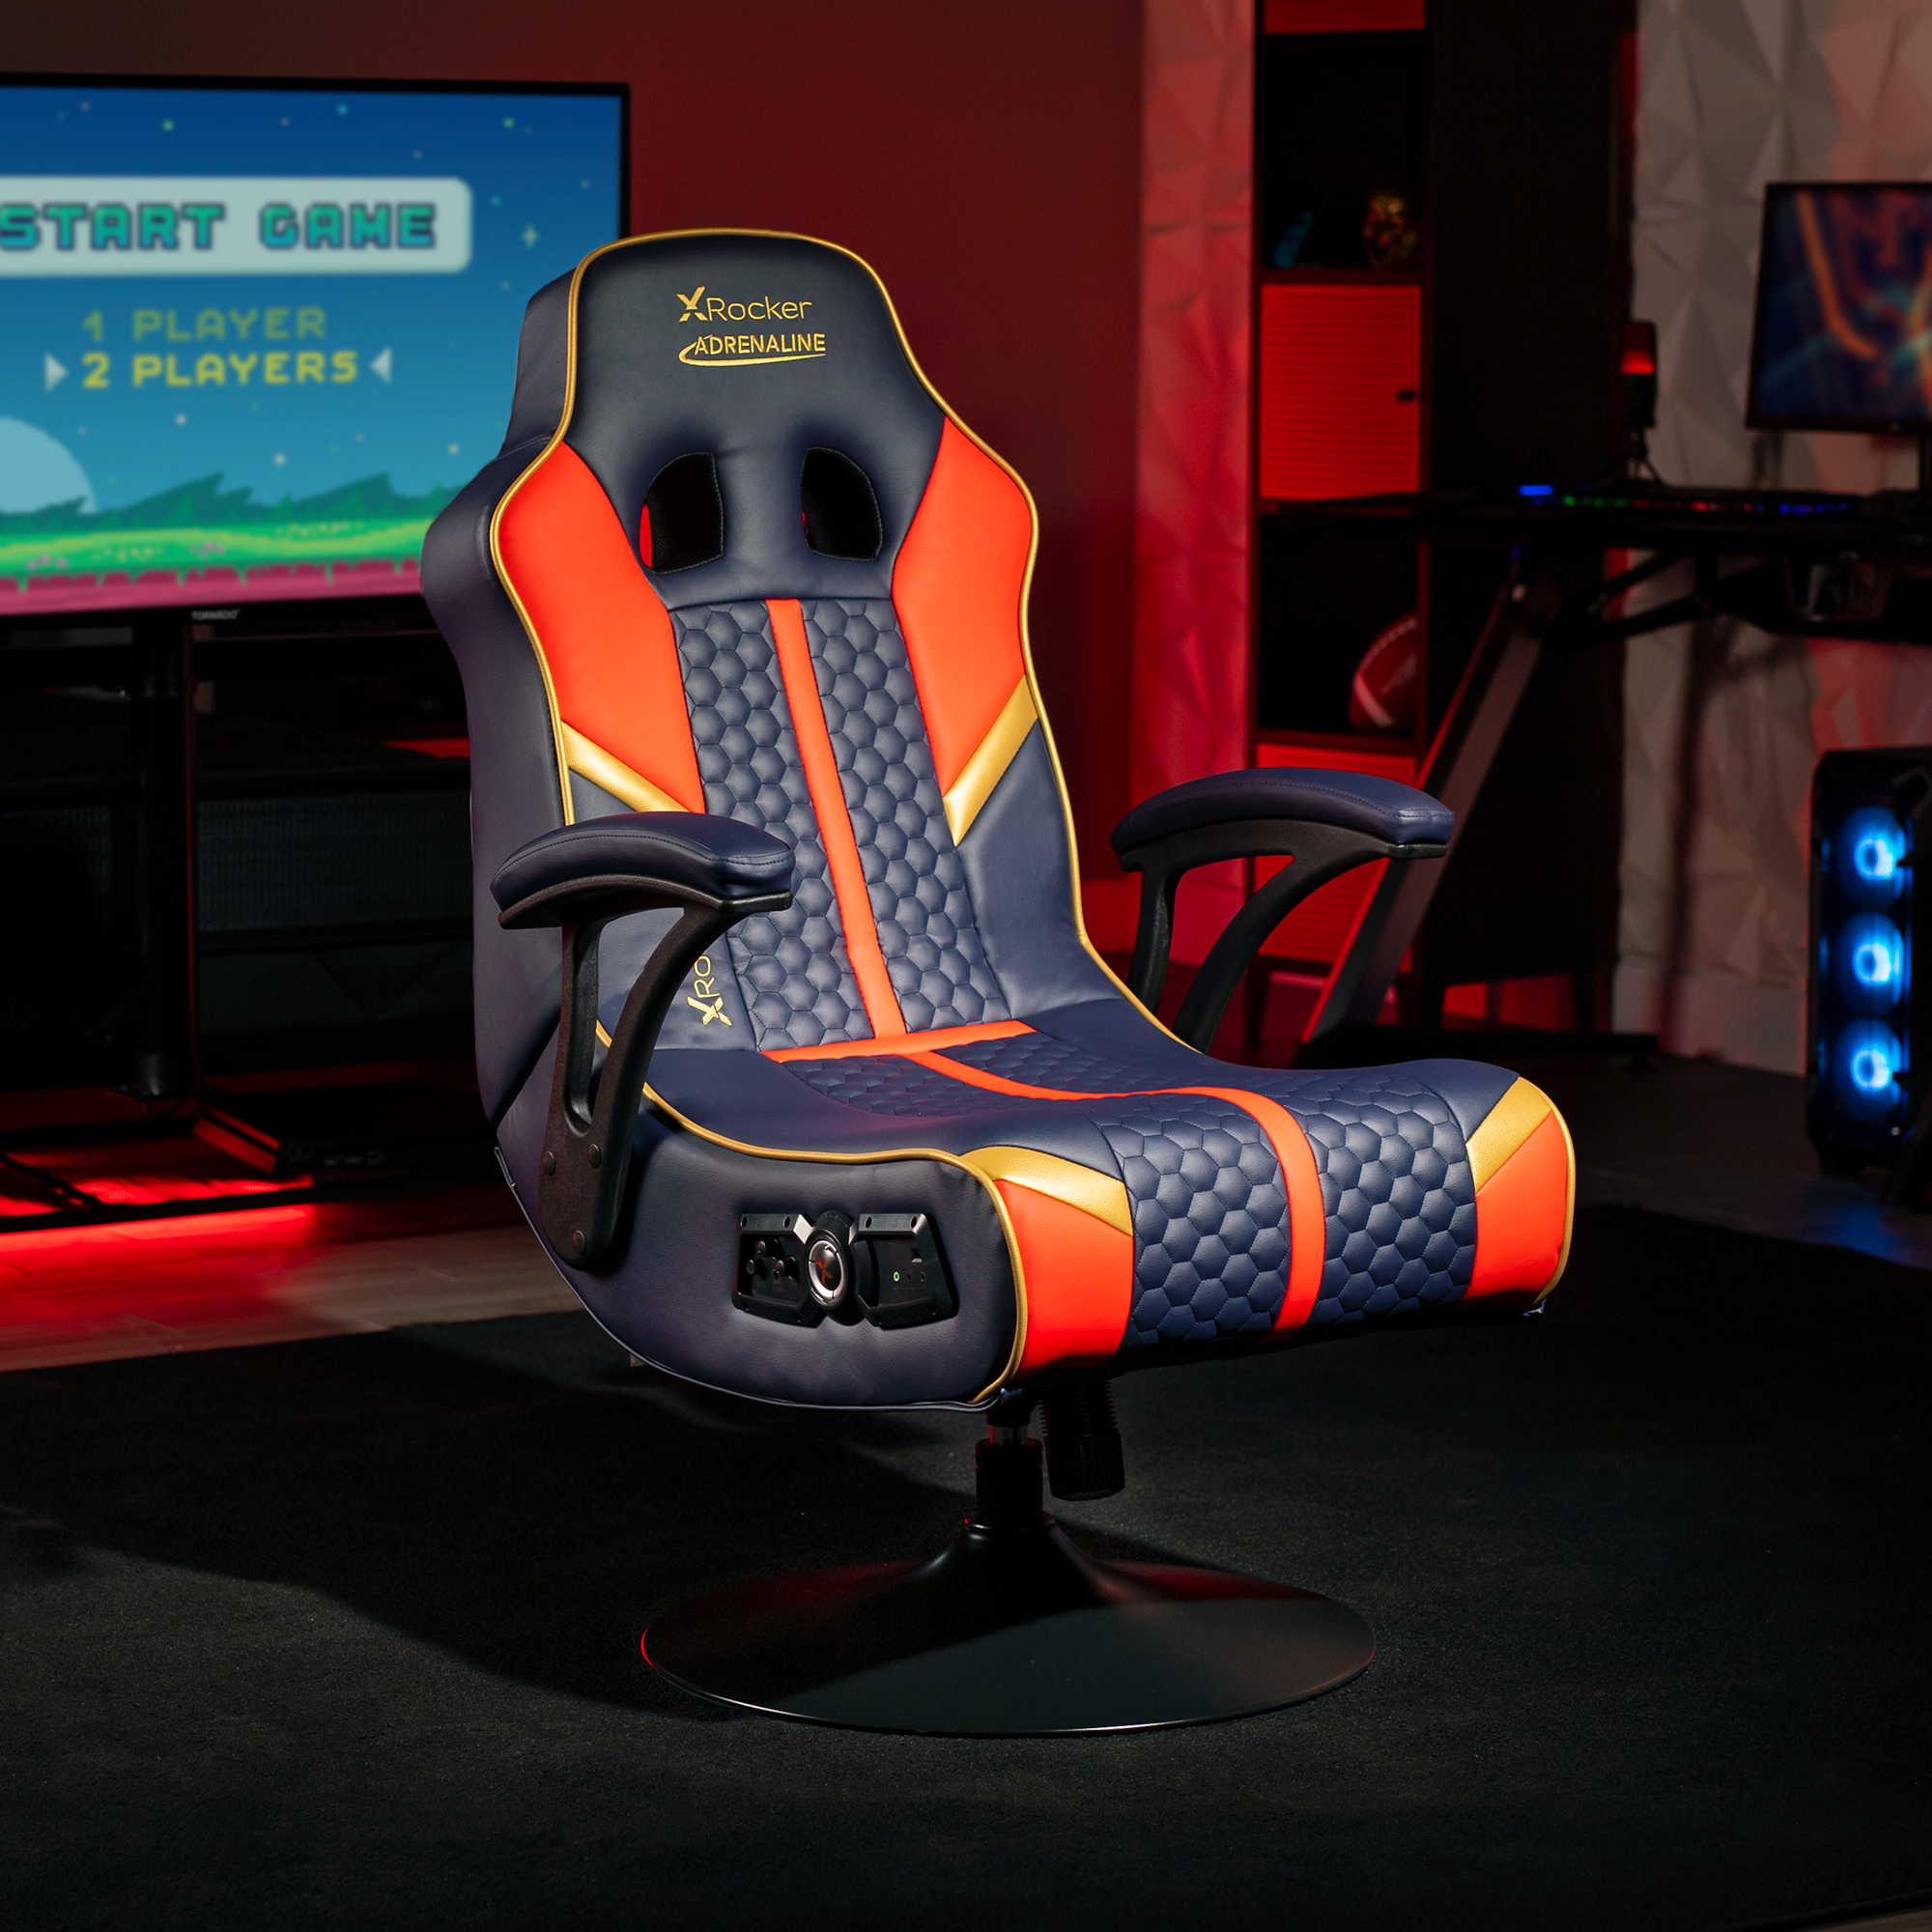 Adrenaline 2.1 Wireless w Vibration Pedestal Gaming Chair, Red, Blue, Gold